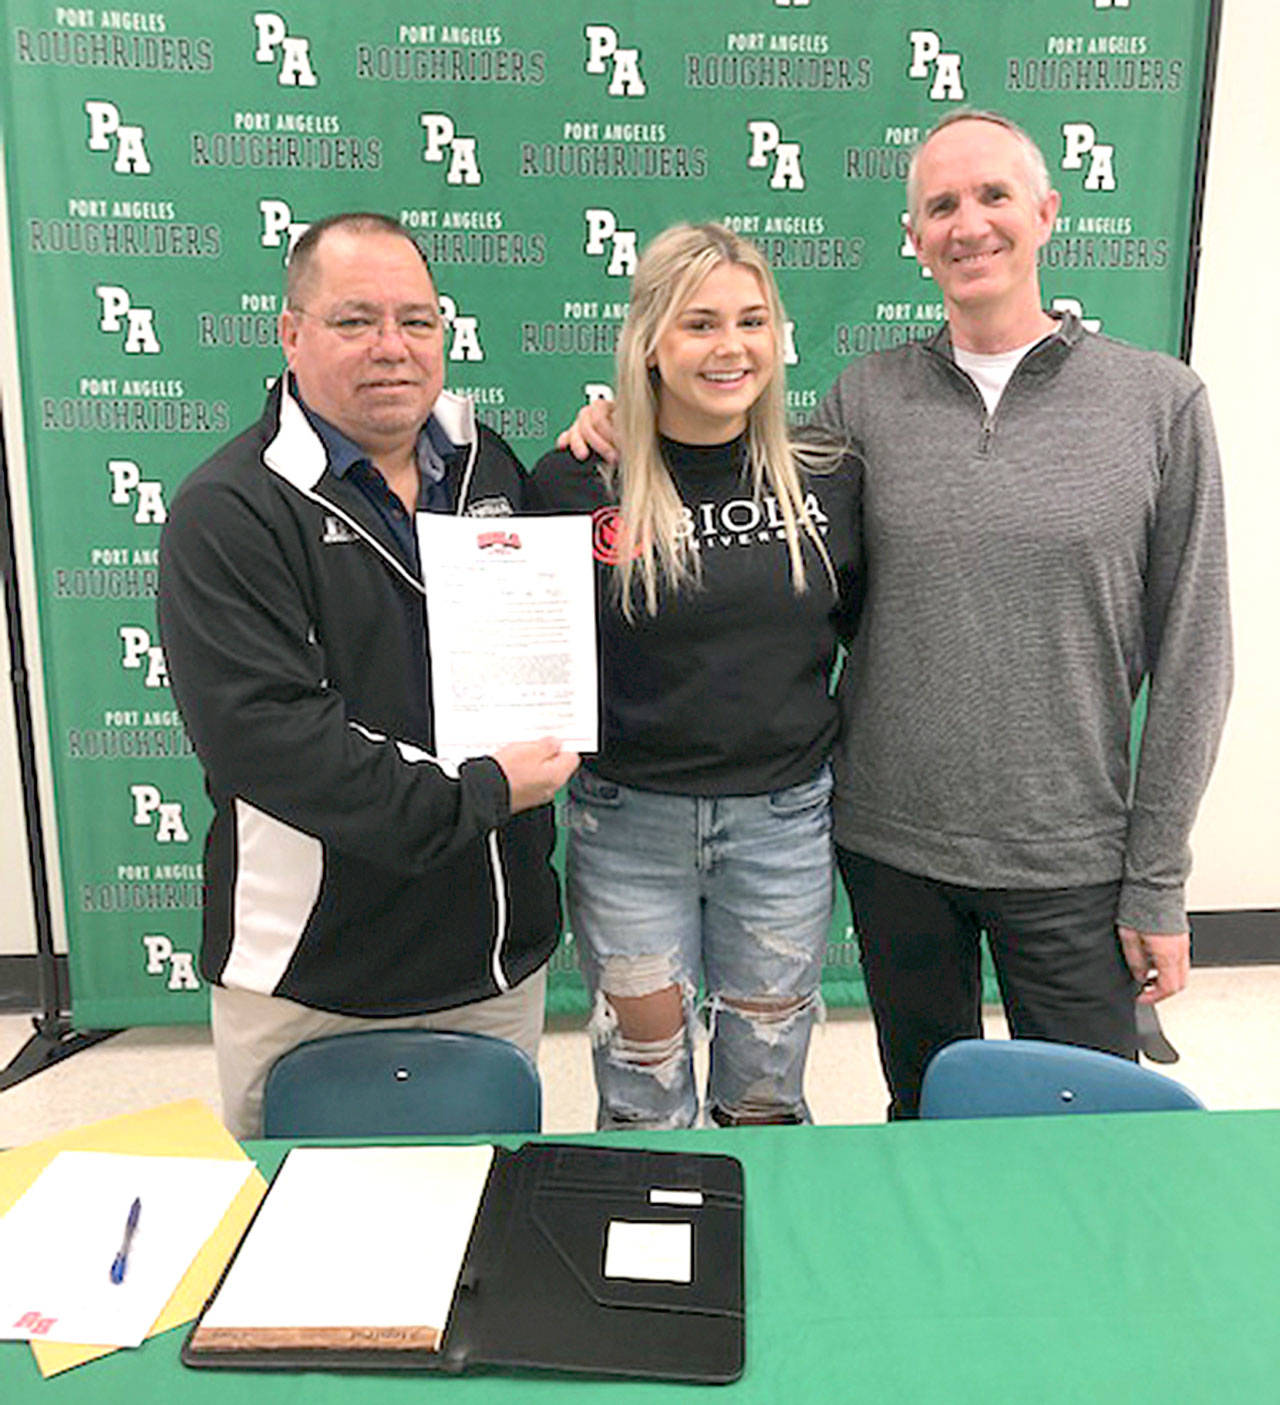 Kenzie Johnson signs to swim for Biola University in Southern California. Johnson placed several times at state for the Roughriders and won a state relay championship her freshman year at Port Angeles. At left is Port Angeles Athletic Director Dwayne Johnson and at right is Port Angeles Girls Swim Coach Britt Hemphill.